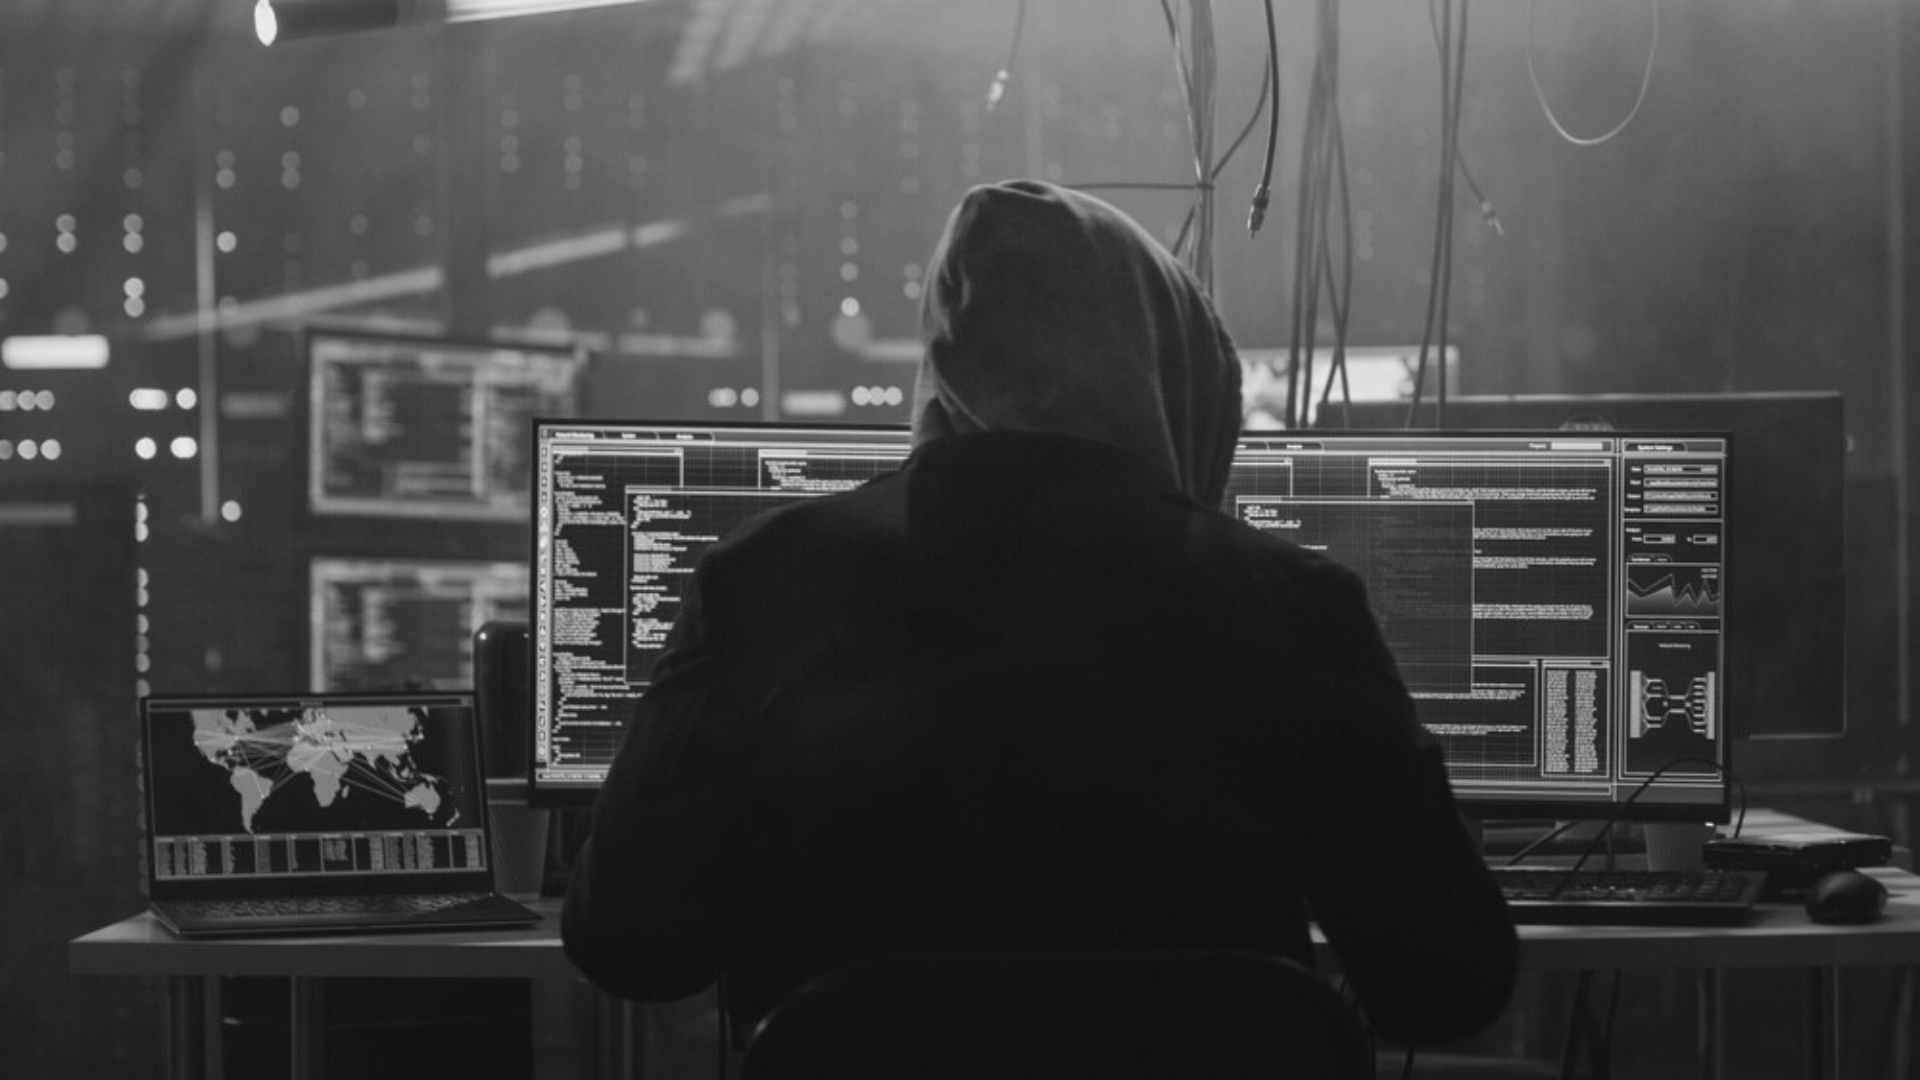 A man in a hood is sitting in front of a computer in a dark room.